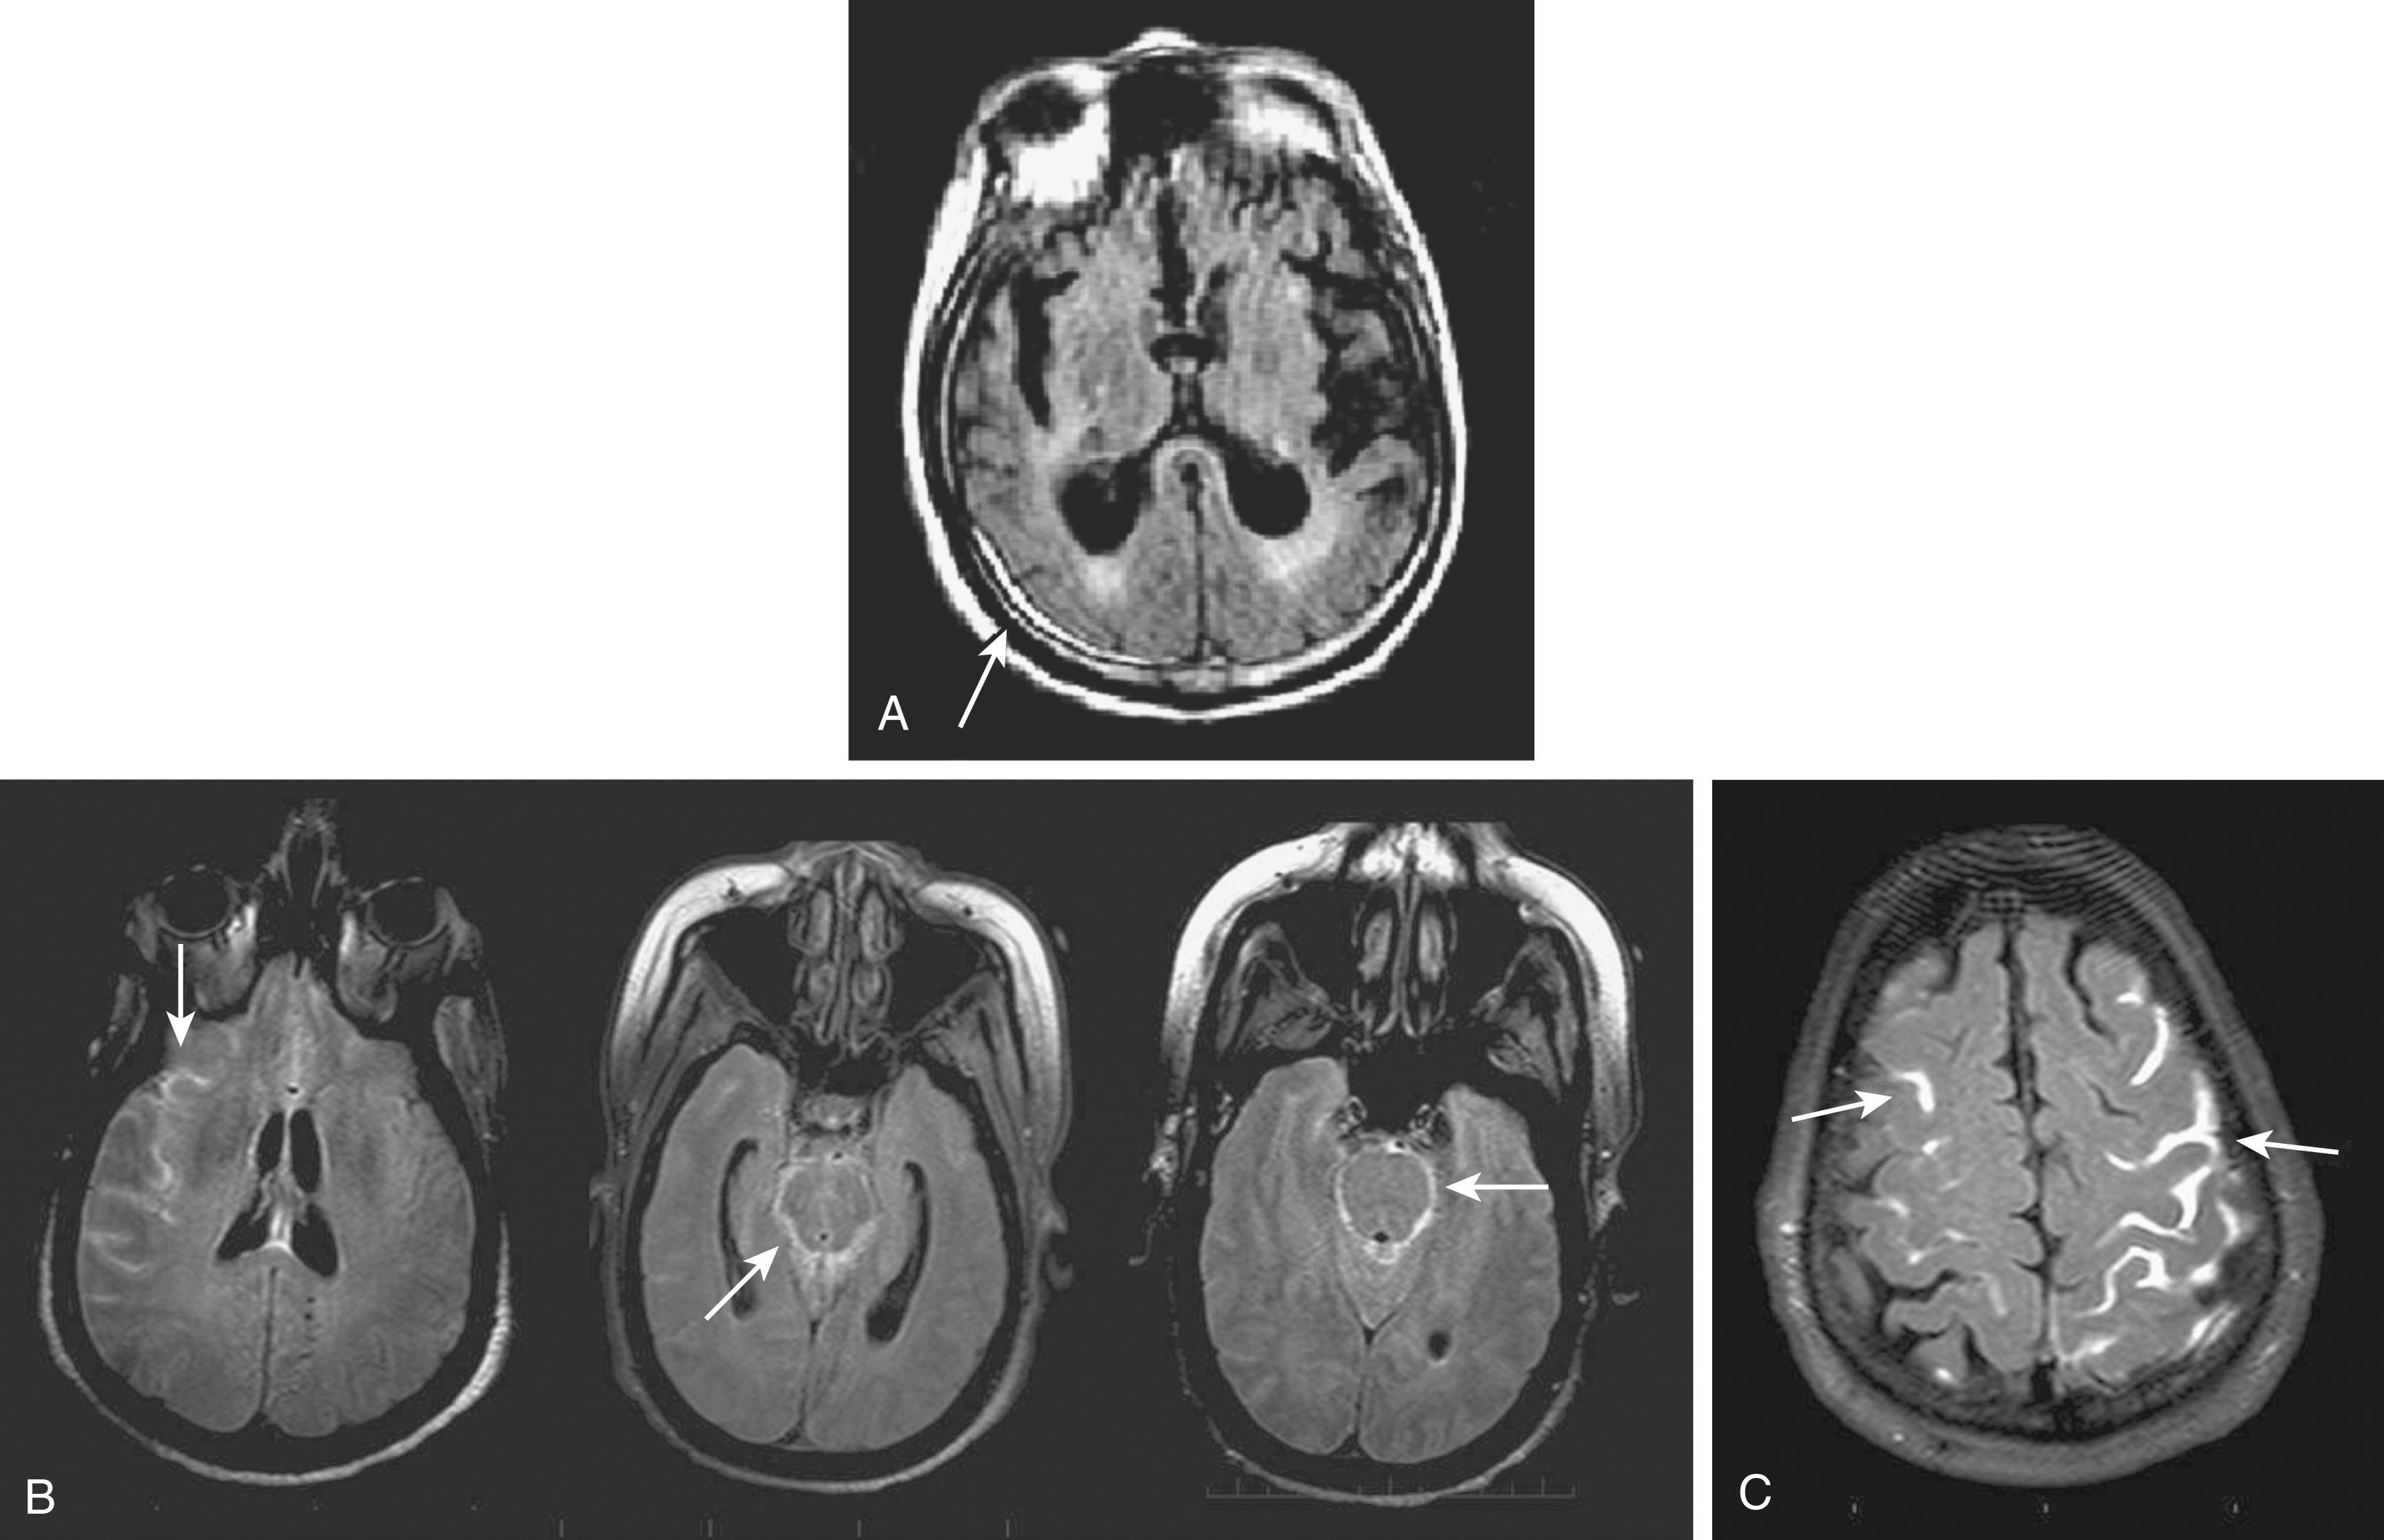 Fig. 48.2, Extra-axial hyperintensity on fluid-attenuated inversion recovery (FLAIR). (A) An example of a subdural hematoma seen on FLAIR (arrow) , with clear contrast between the hyperintensity of the blood and the background tissue. This small subdural hematoma was not seen on computed tomography (CT). (B) FLAIR images from a 47-year-old man with a subarachnoid hemorrhage. Blood appears hyperintense in the subarachnoid space at multiple levels. (C) FLAIR images showing gadolinium enhancement of cerebrospinal fluid in hemispheric sulci (arrows) after intravenous tissue-type plasminogen activator treatment. This is the hyperintense acute reperfusion marker (HARM) sign, which indicates early blood-brain barrier disruption in stroke and is associated with reperfusion and increased risk of hemorrhagic transformation. The HARM sign is more likely to be seen following thrombolytic therapy. The main imaging differential is blood, which can be ruled out by gradient recalled echo MRI or CT.